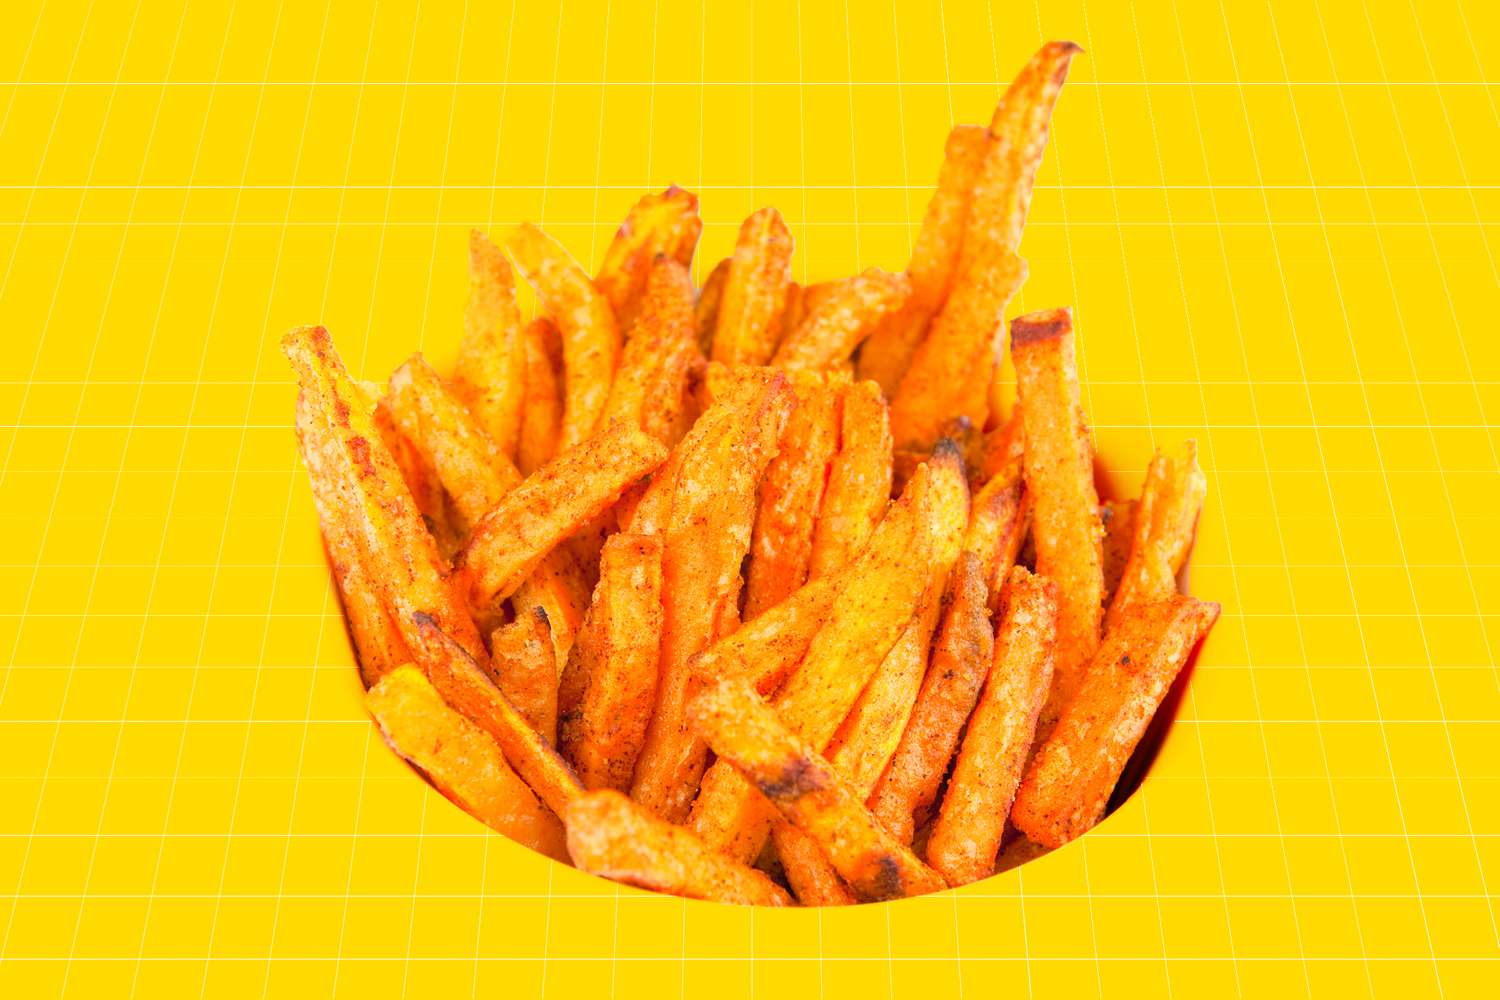 Sweet Potato fries with a designed treatment